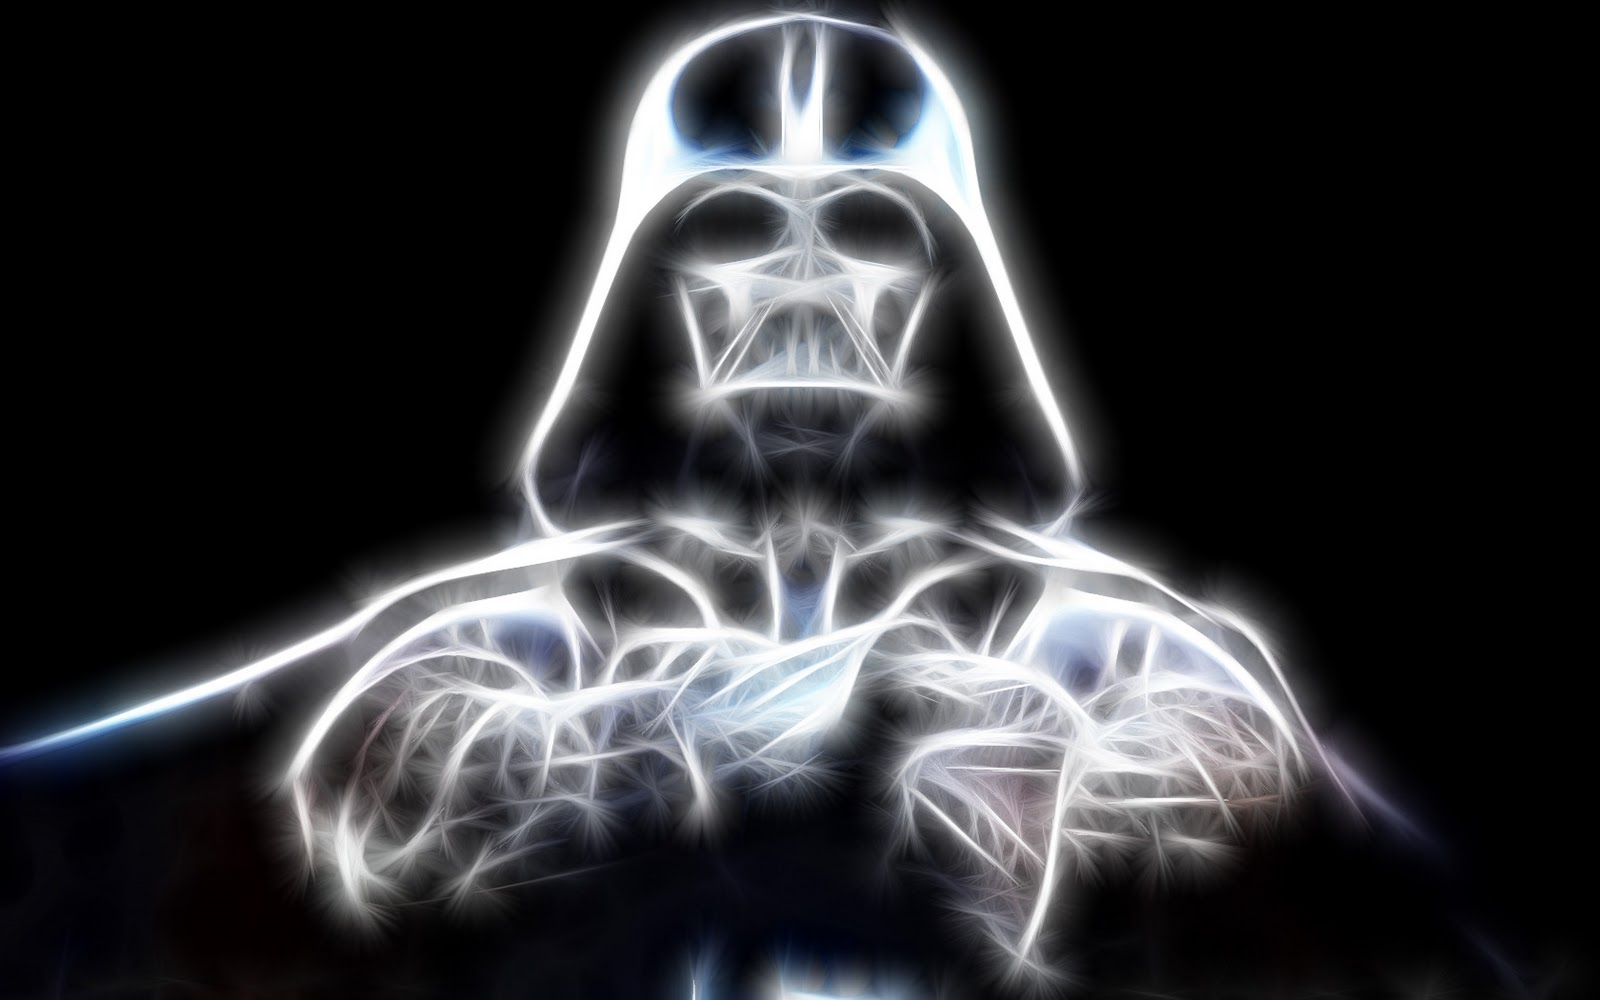 Star Wars Wallpaper Pictures Cool Things Collection